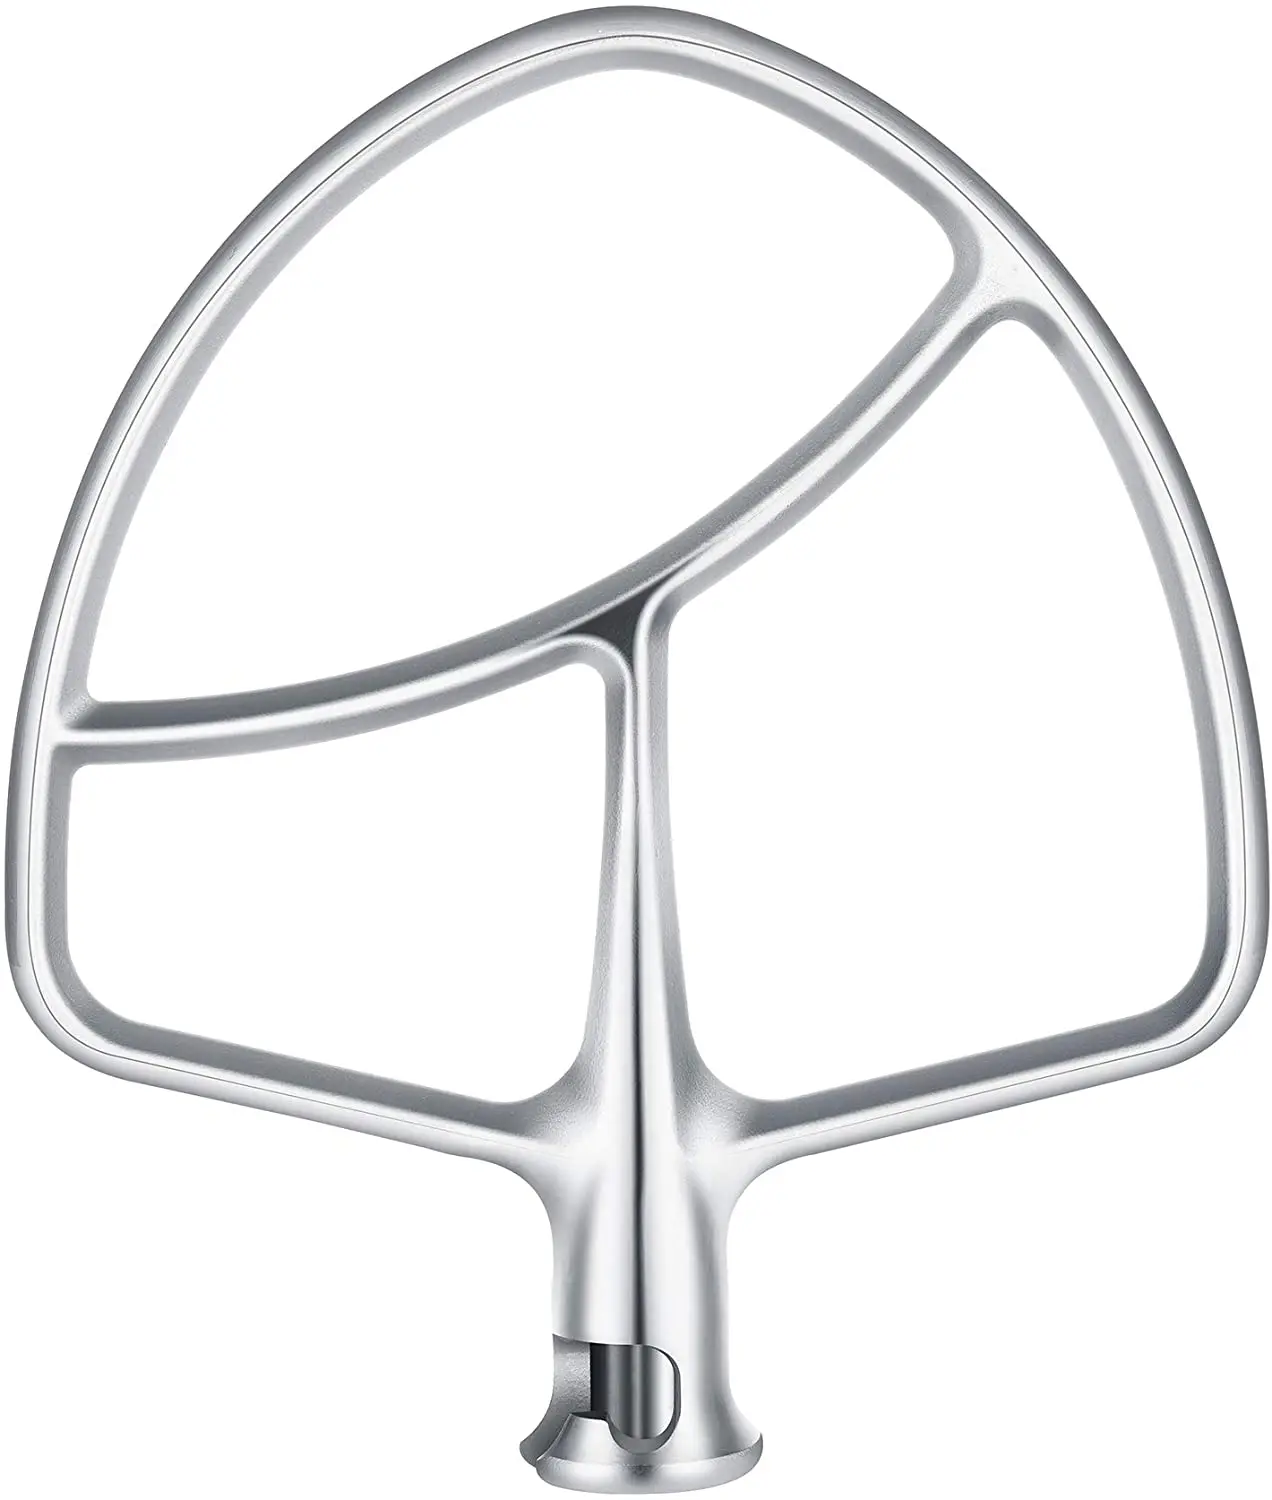 

Stainless Steel Stainless Flat Beater for KitchenAid 6quart Bowl-Lift Stand Mixer-Efficient Mixing Attachment Dishwasher